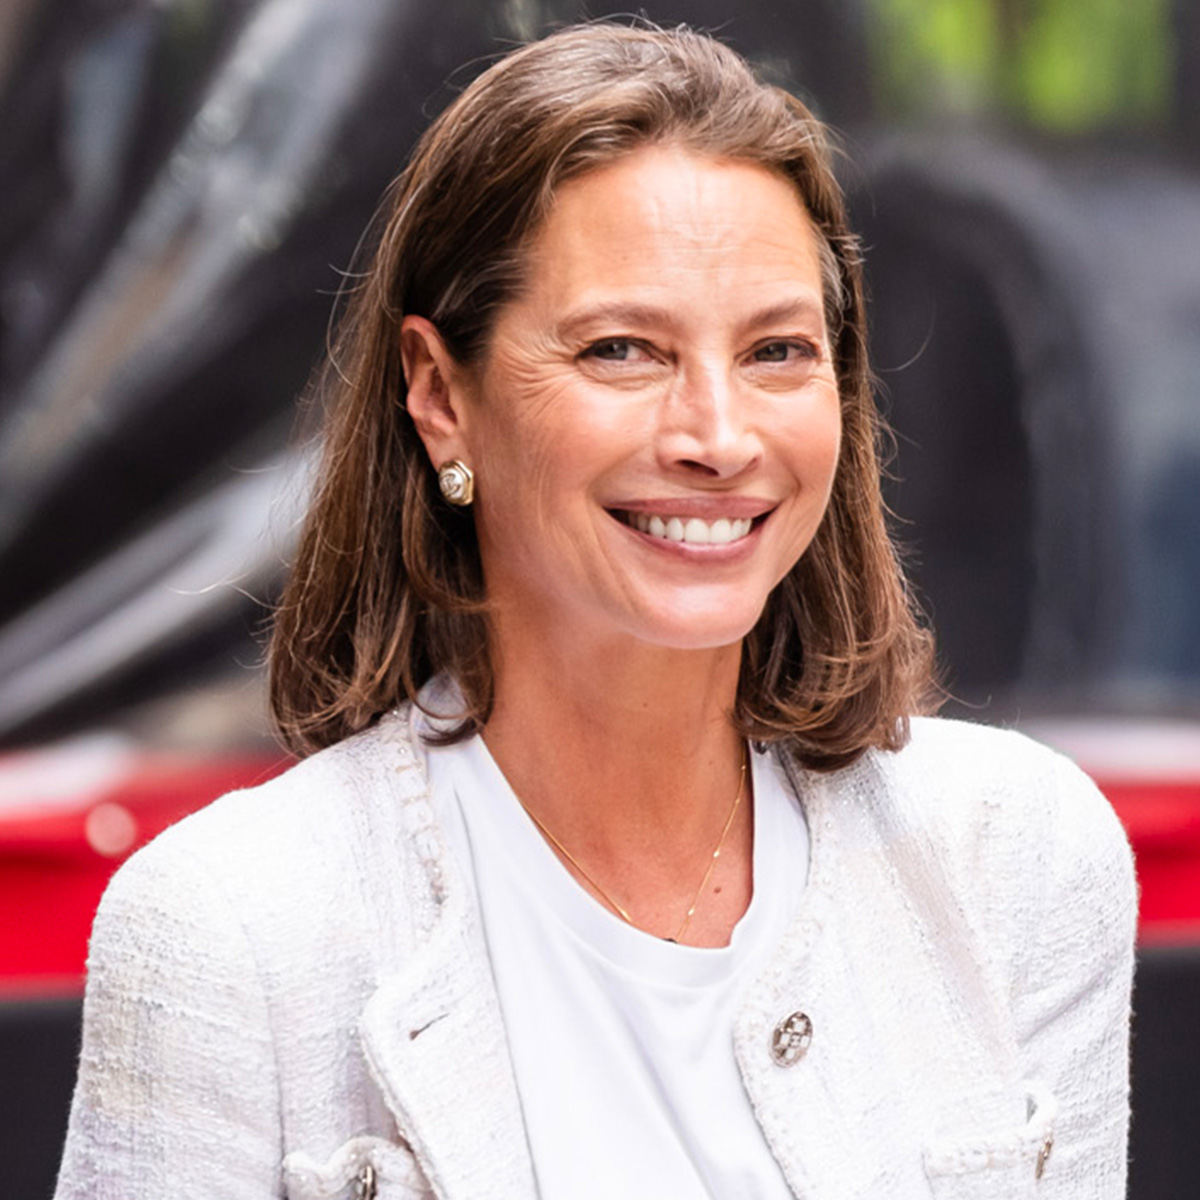 Christy Turlington Wore the Jacket Trend That Will Always Make Jeans Look Elegant